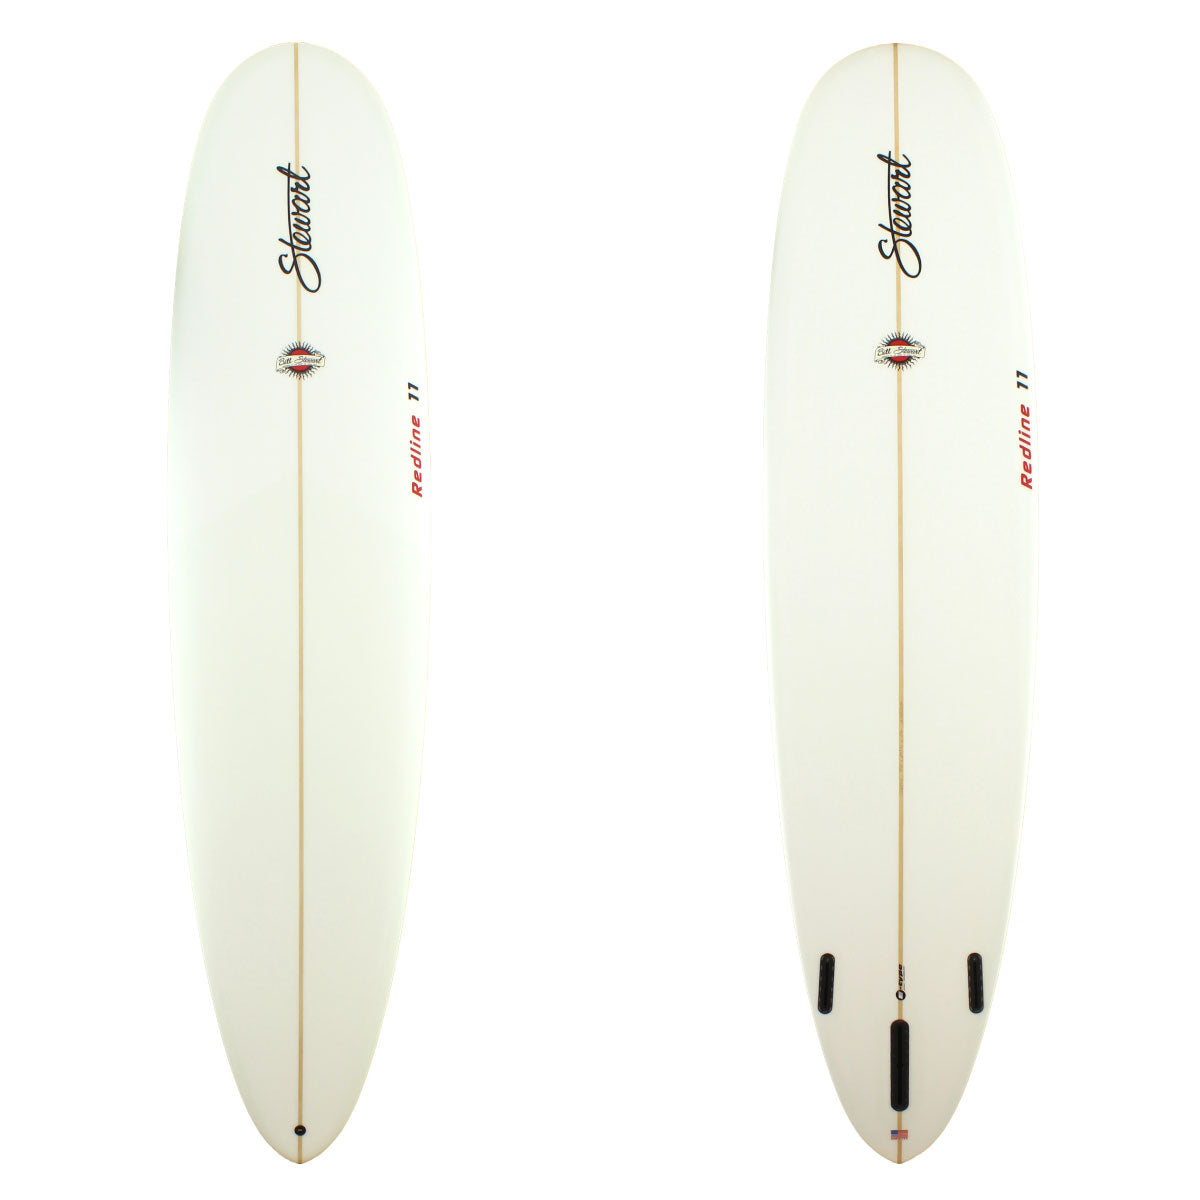 Stewart Surfboards Redline 11 longboard (9'0", 23 3/4", 3 1/4") with clear white deck and bottom